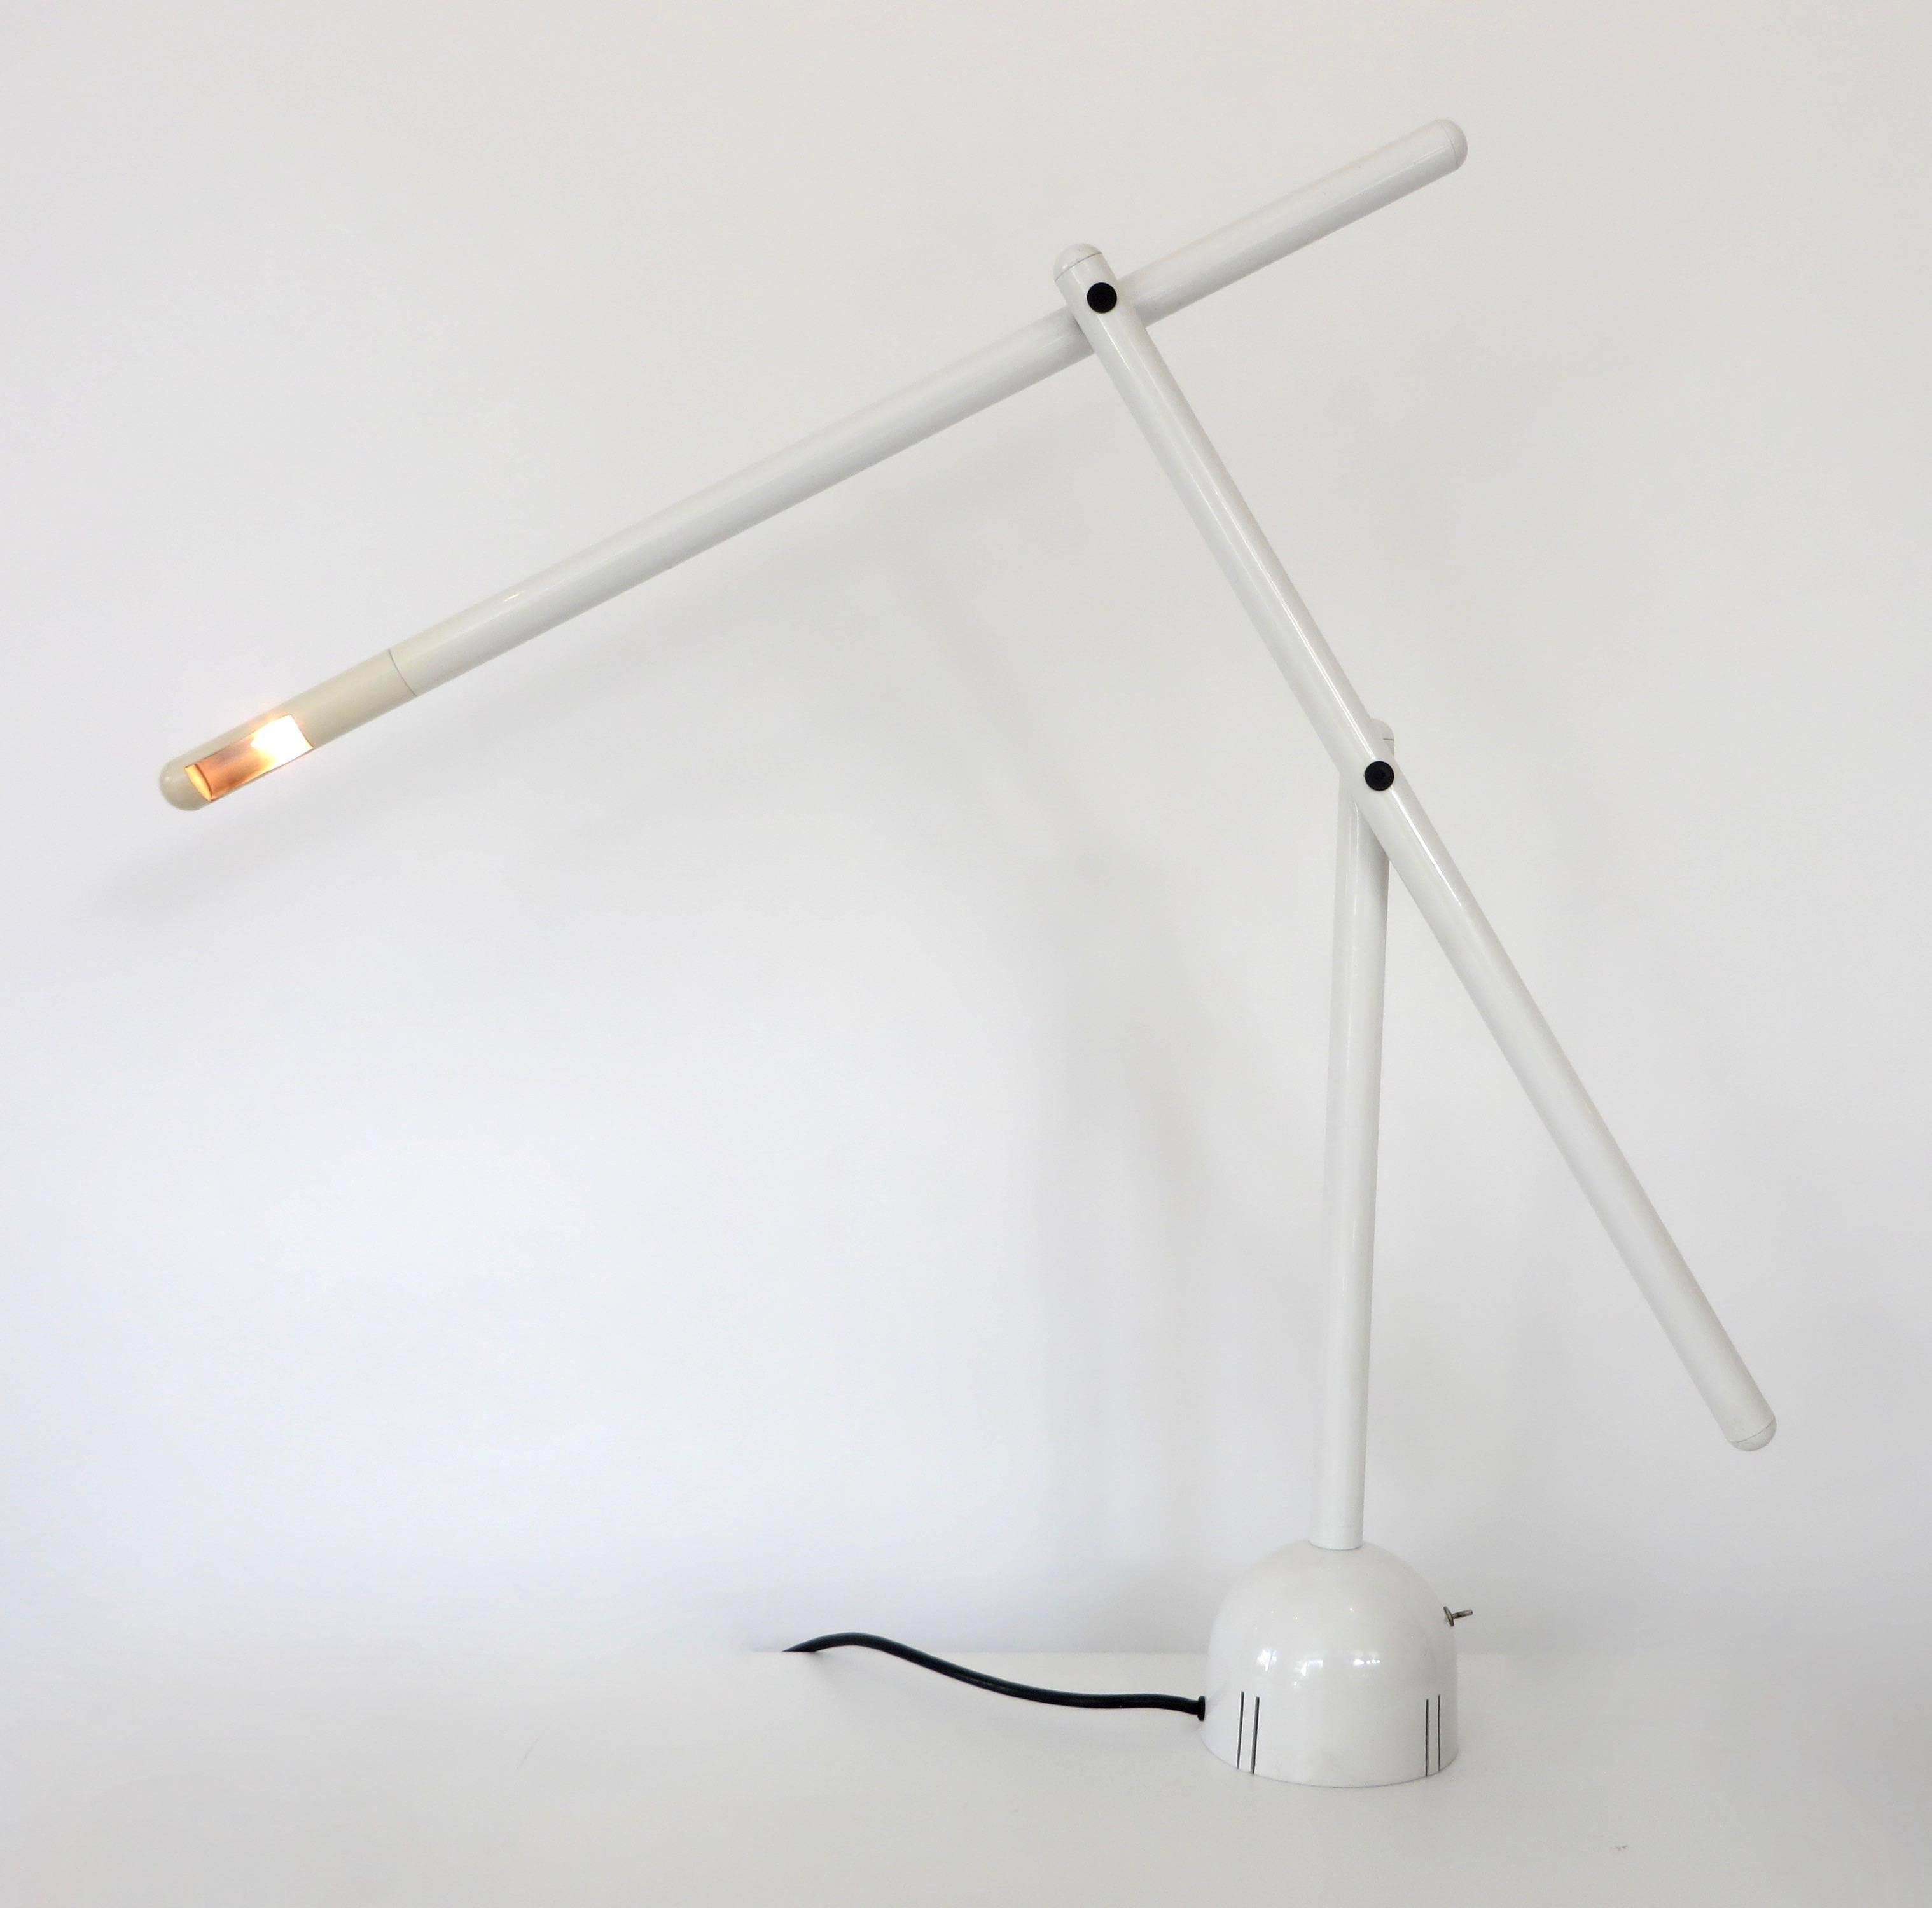 A Mira table lamp designed by Mario Arnaboldi for the Italian firm Programmaluce. Production of this lamp was very limited. This example in white enameled metal. Its arms can be adjusted and moved into a variety of positions emphasizing the angular